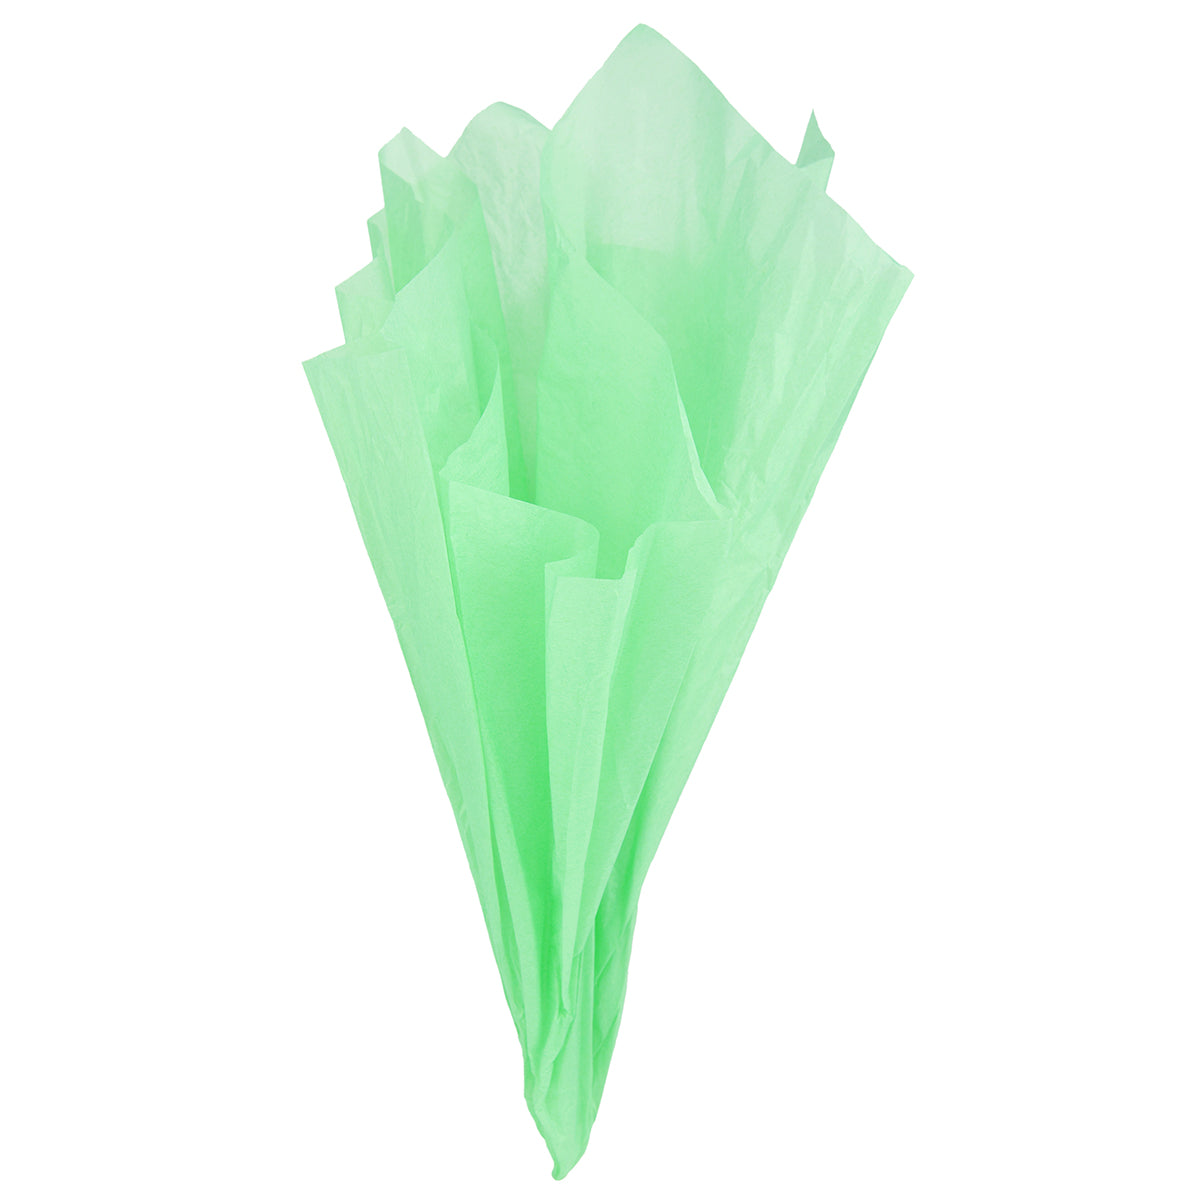 Displaying of a light green tissue paper in ice cream cone shape